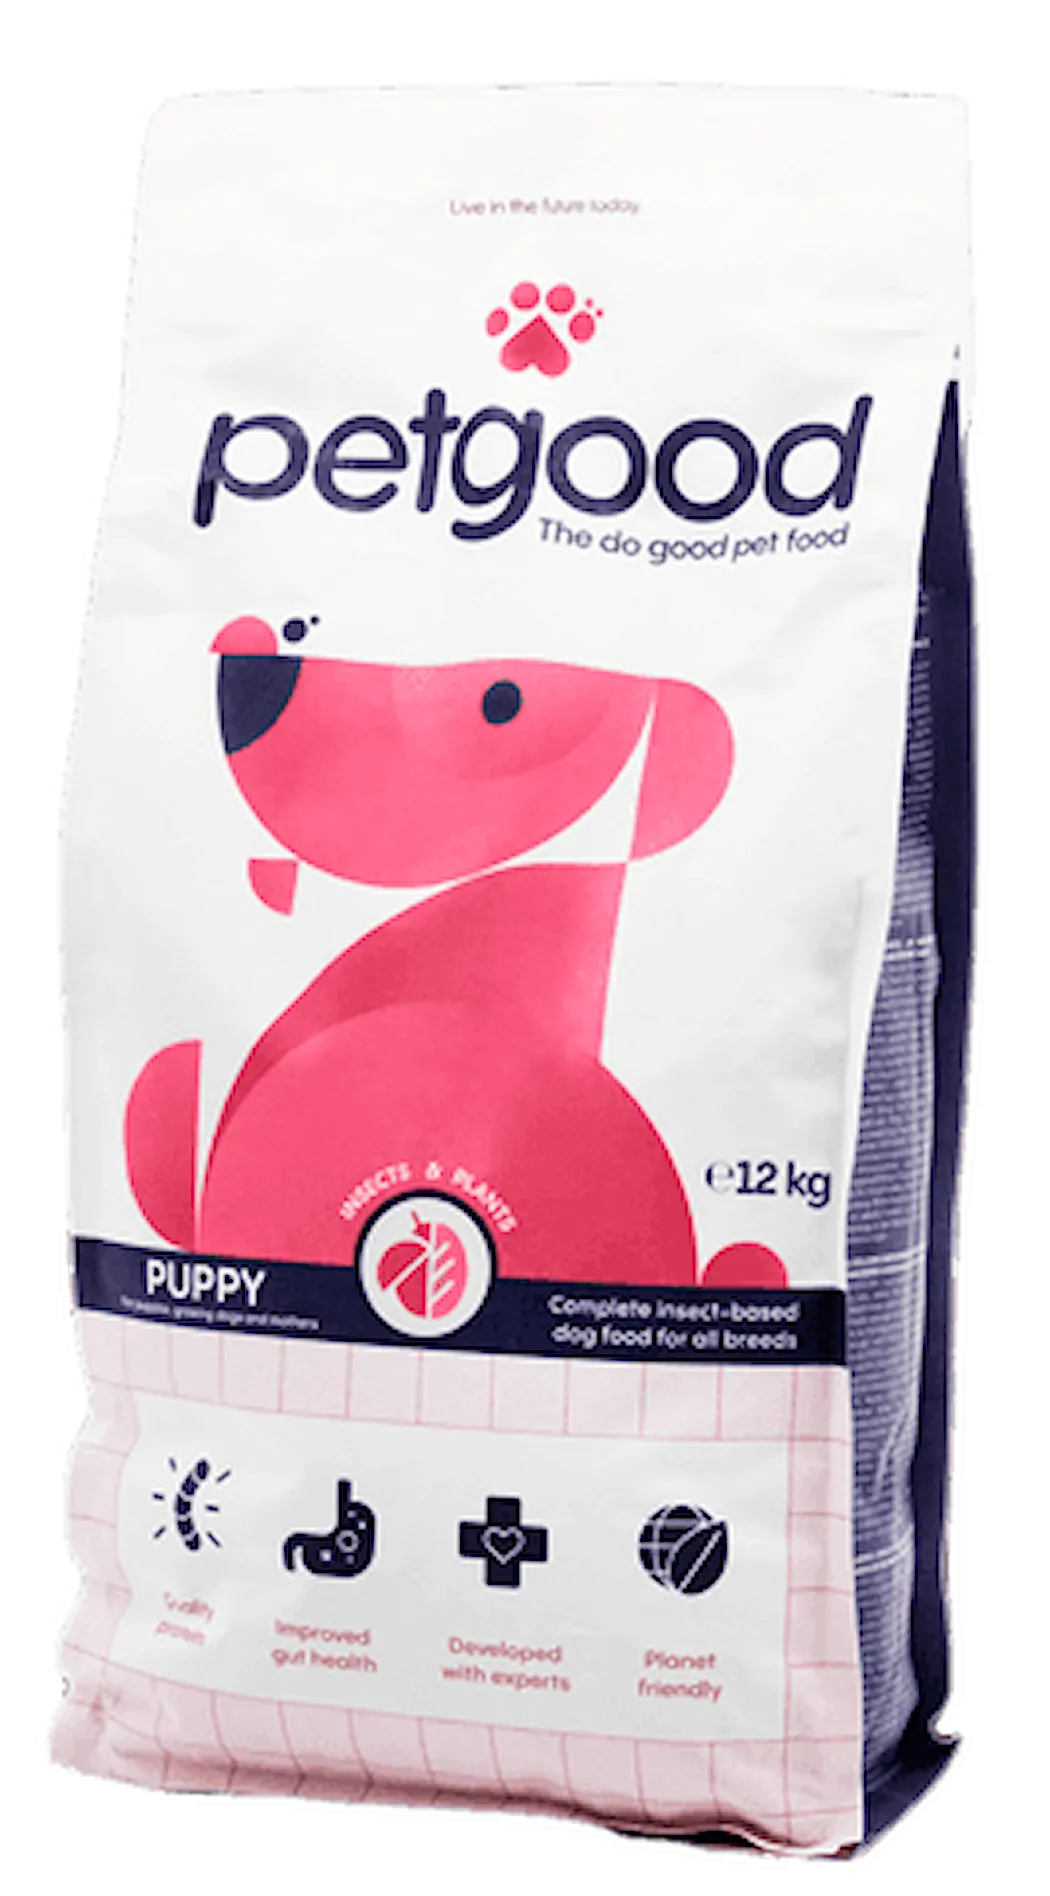 Insect-Based Dog Food For Puppies